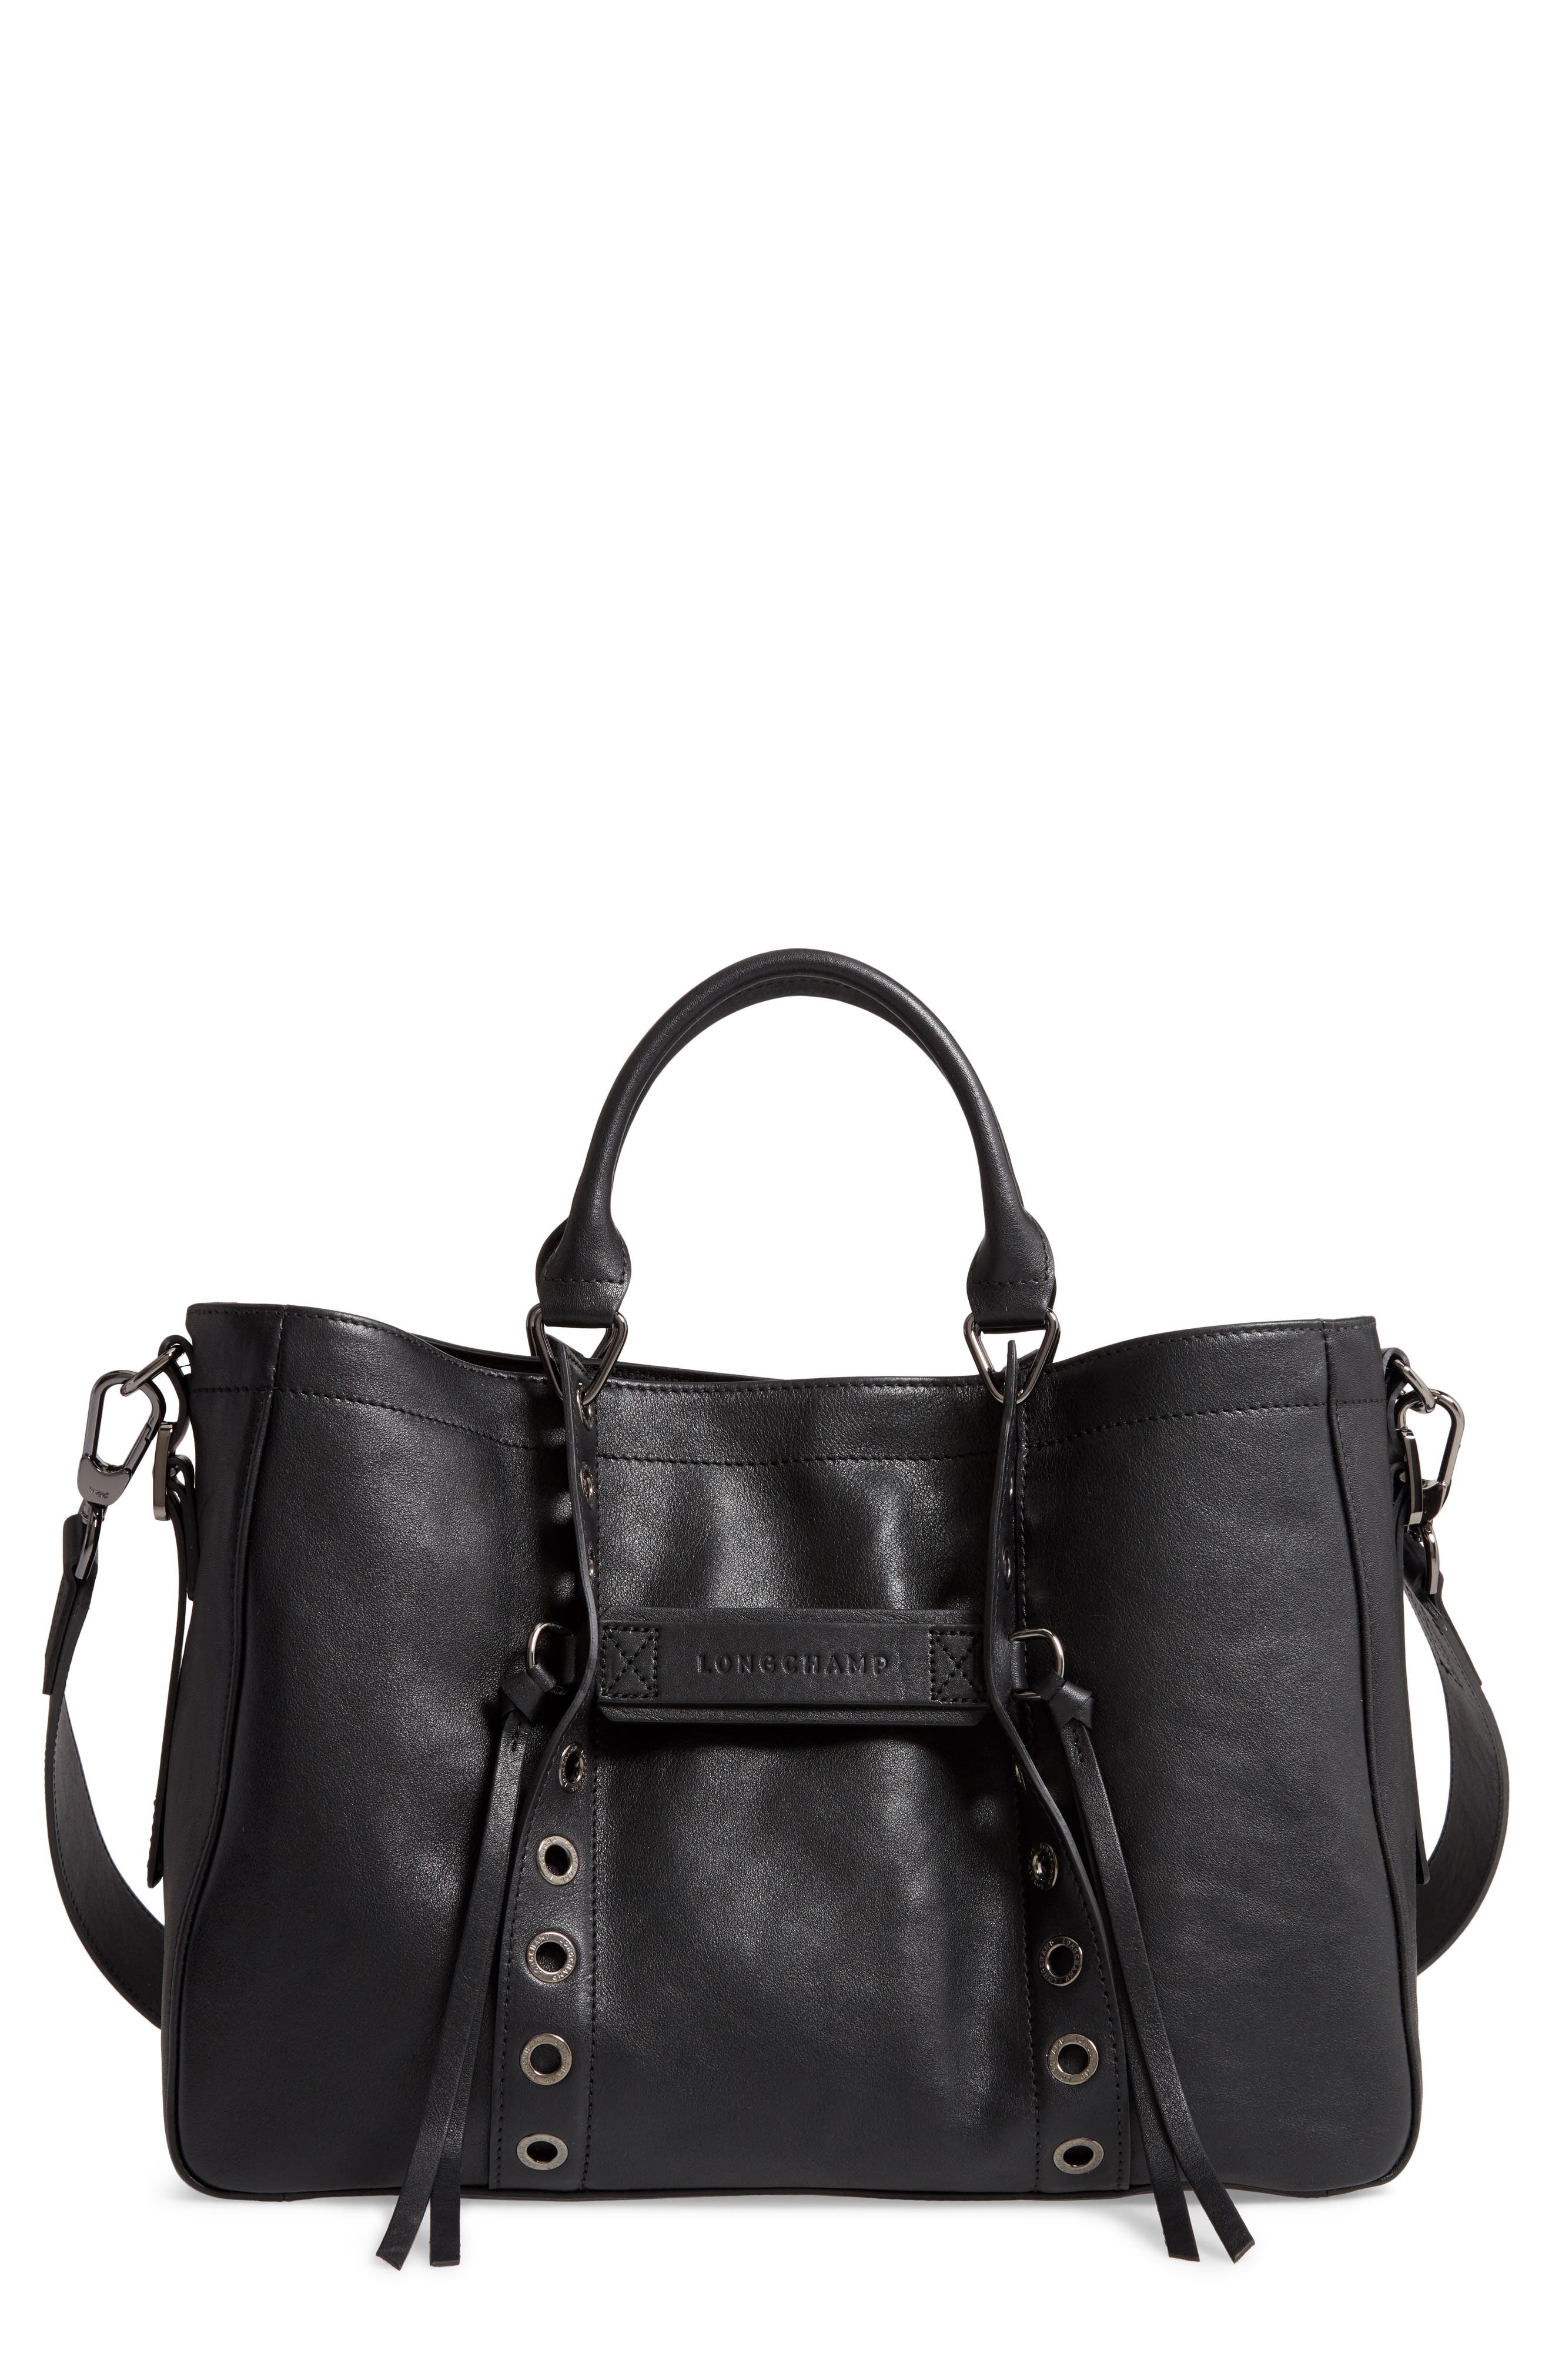 Longchamp 3D Rock Leather Tote | Nordstrom